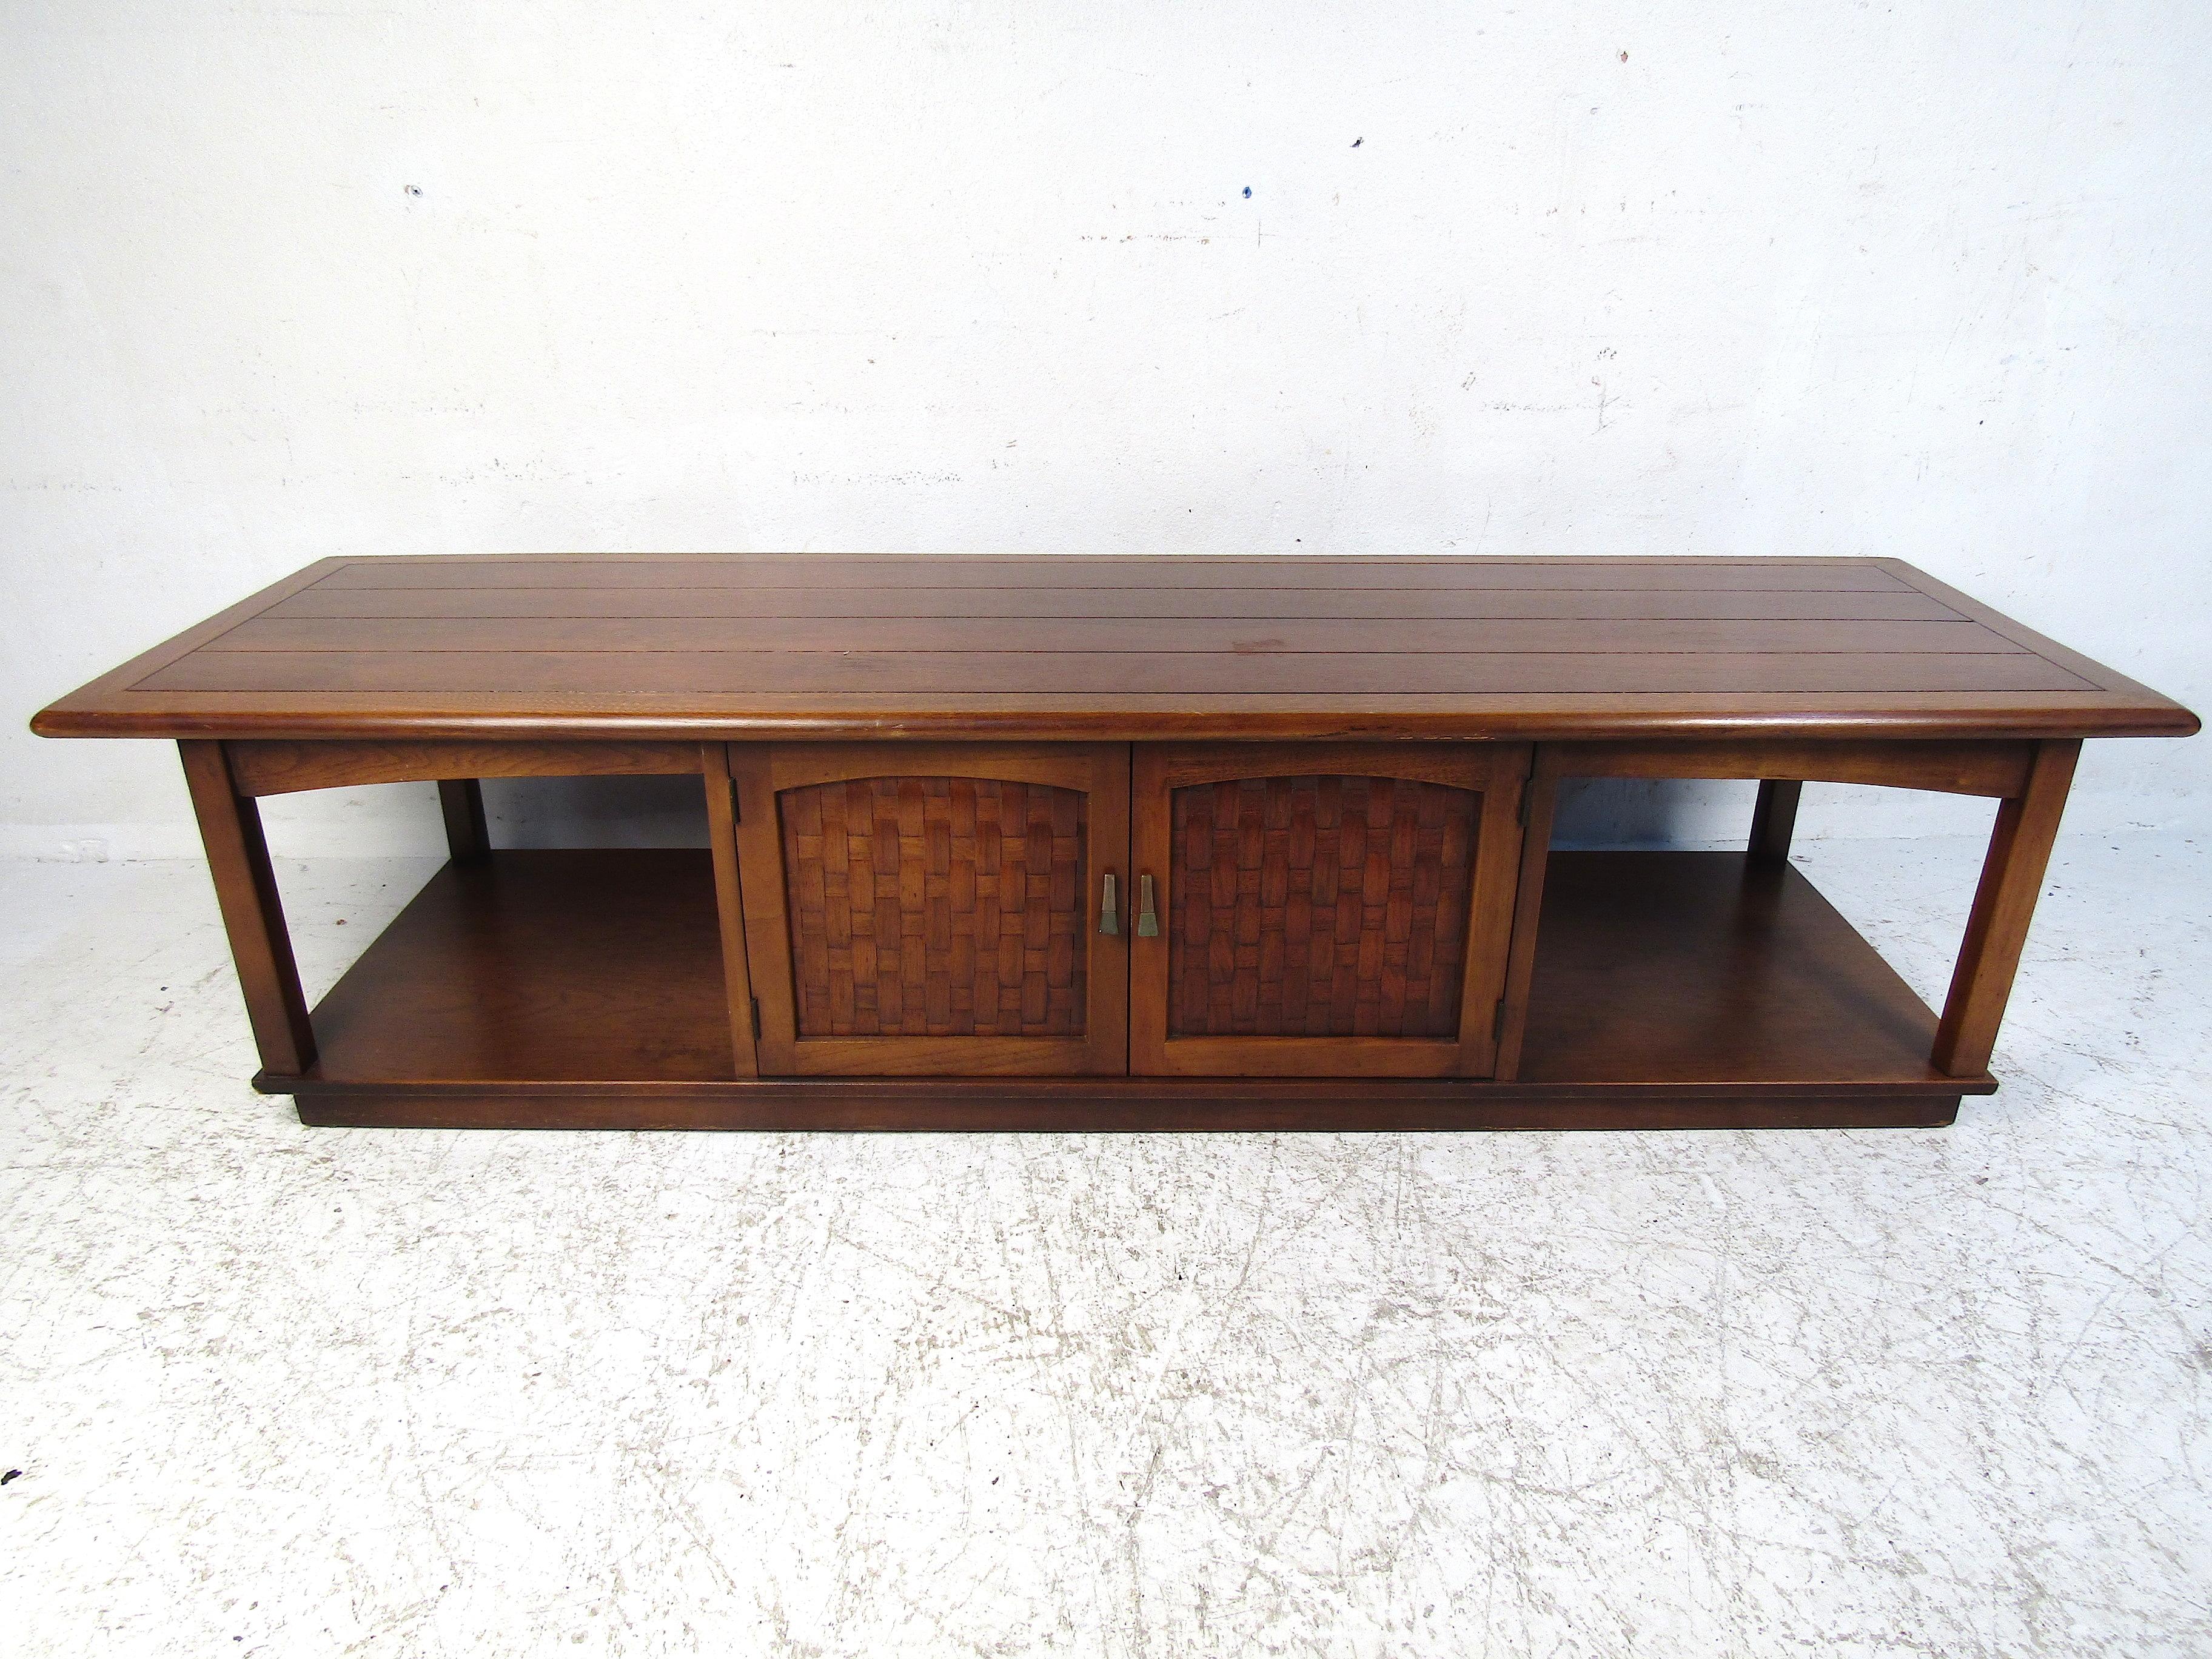 Nice midcentury coffee table by Lane Furniture Co. Interesting design with two tiers, rounded edges, and a storage compartment. Woven accents on the cabinet door-fronts.